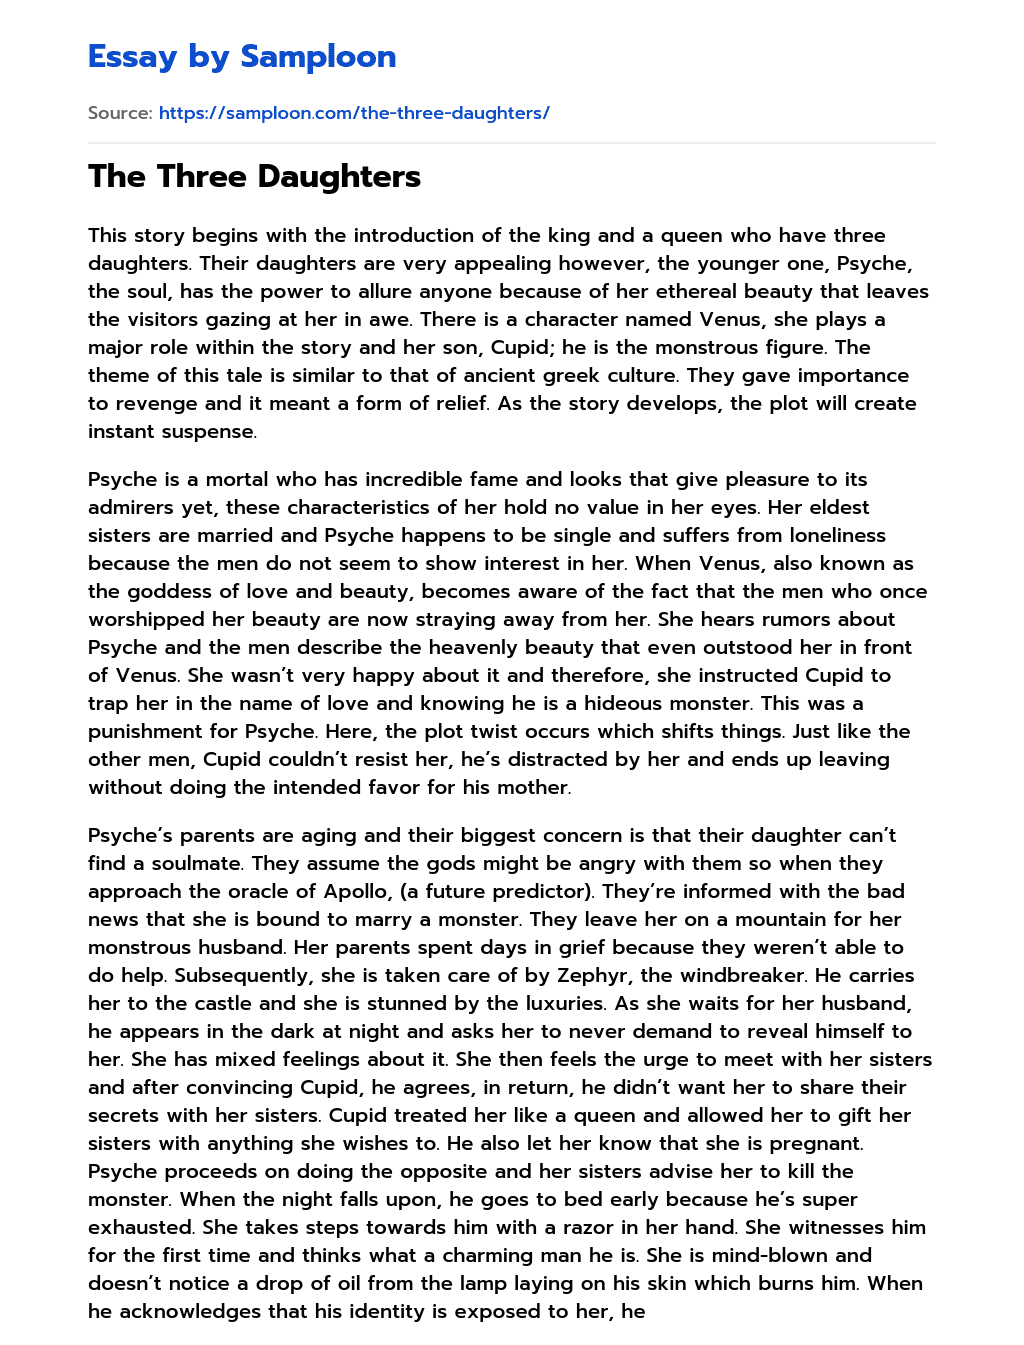 The Three Daughters essay